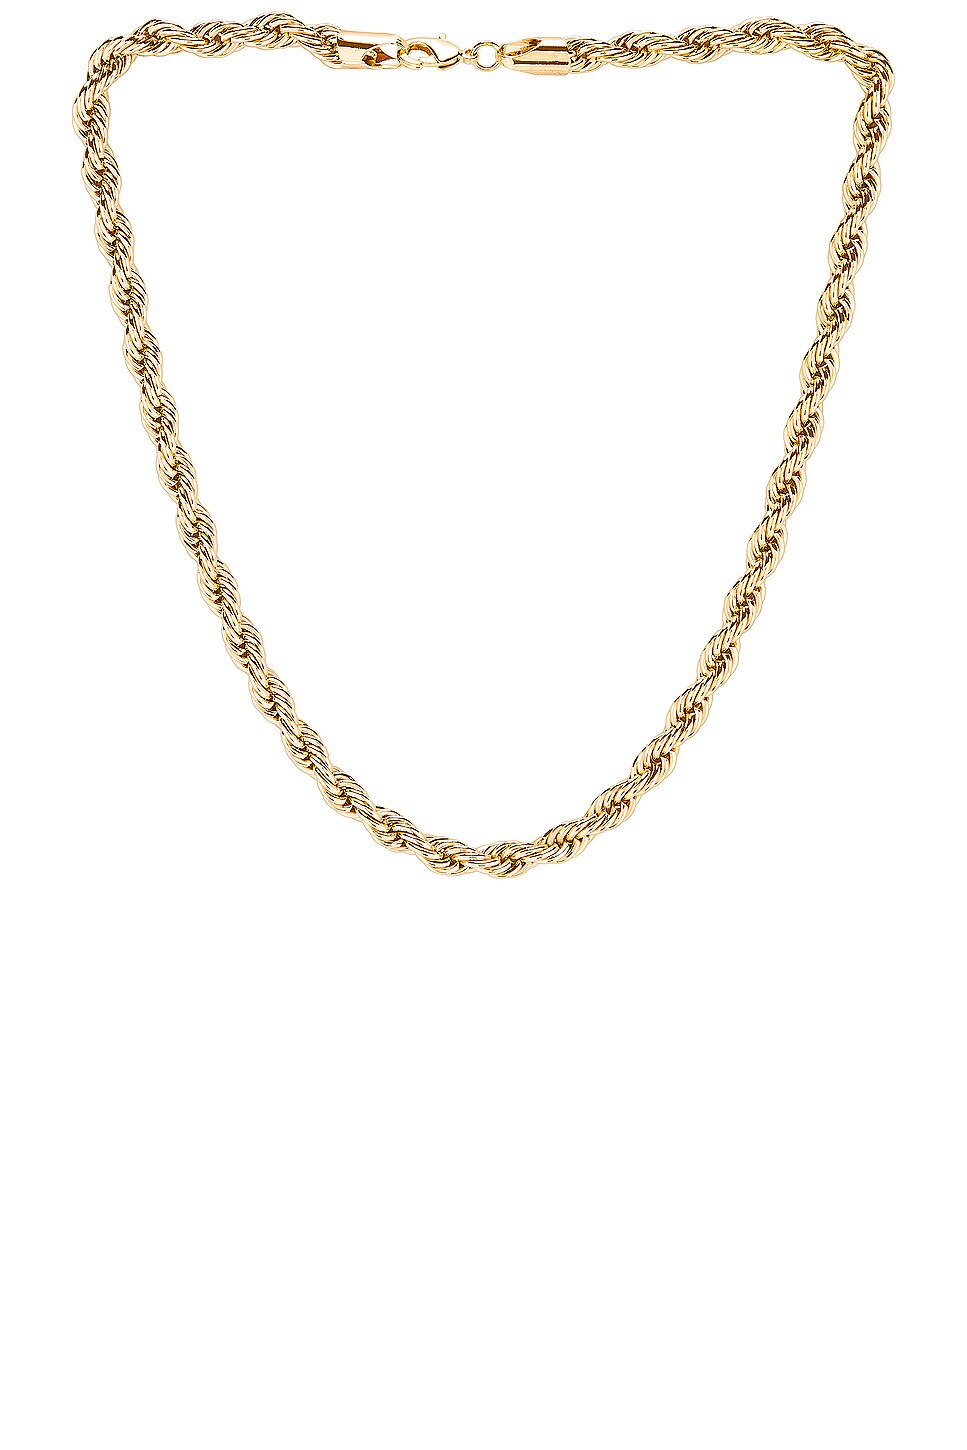 Image 1 of Jordan Road Jewelry Celine Thick Necklace in Gold